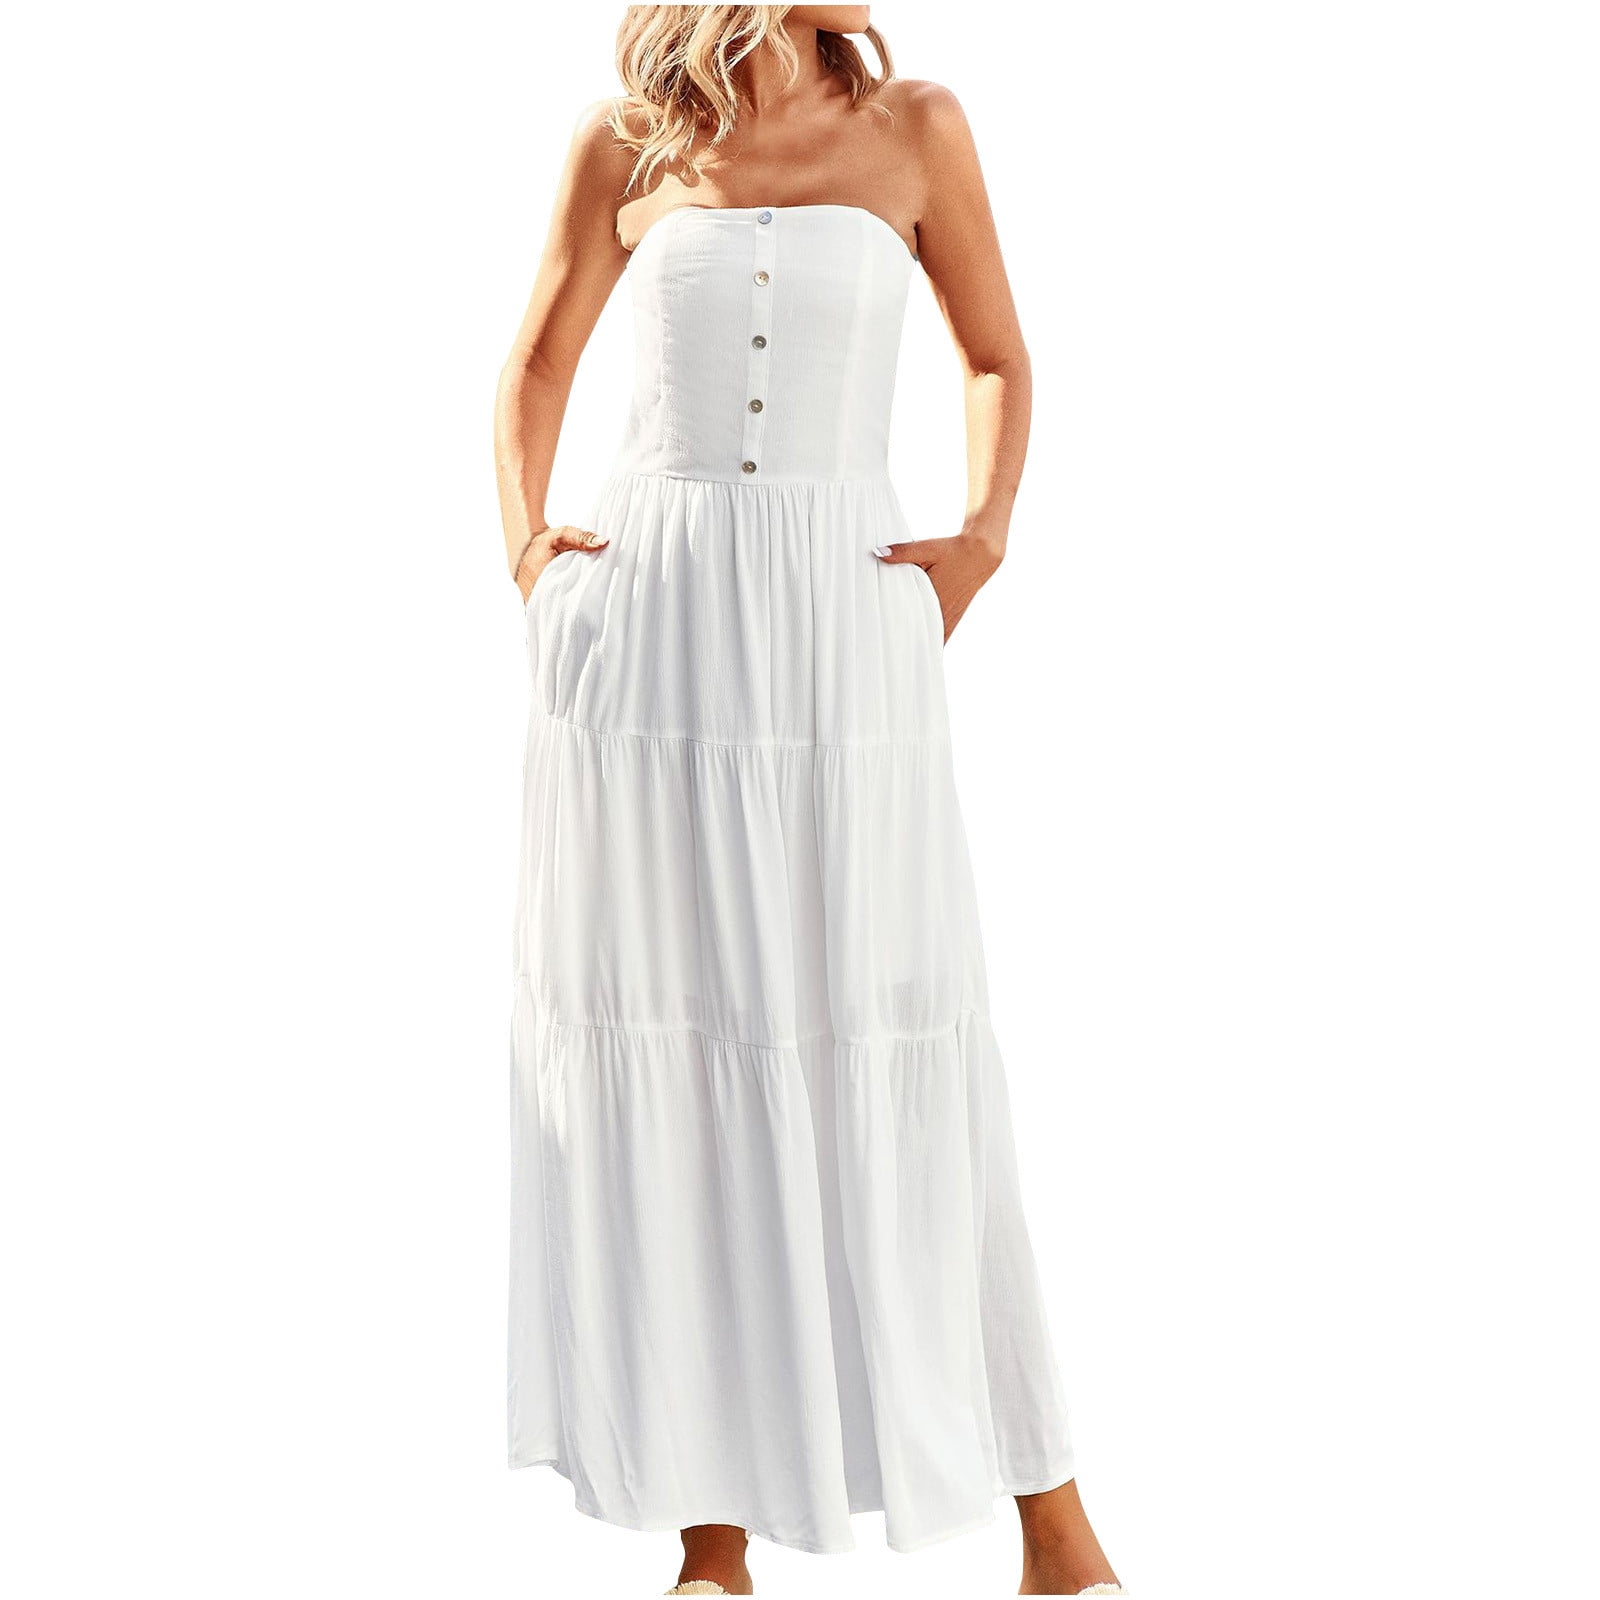 ameIAEA Women Summer Strapless Maxi Dress Solid Color Button Tiered ...